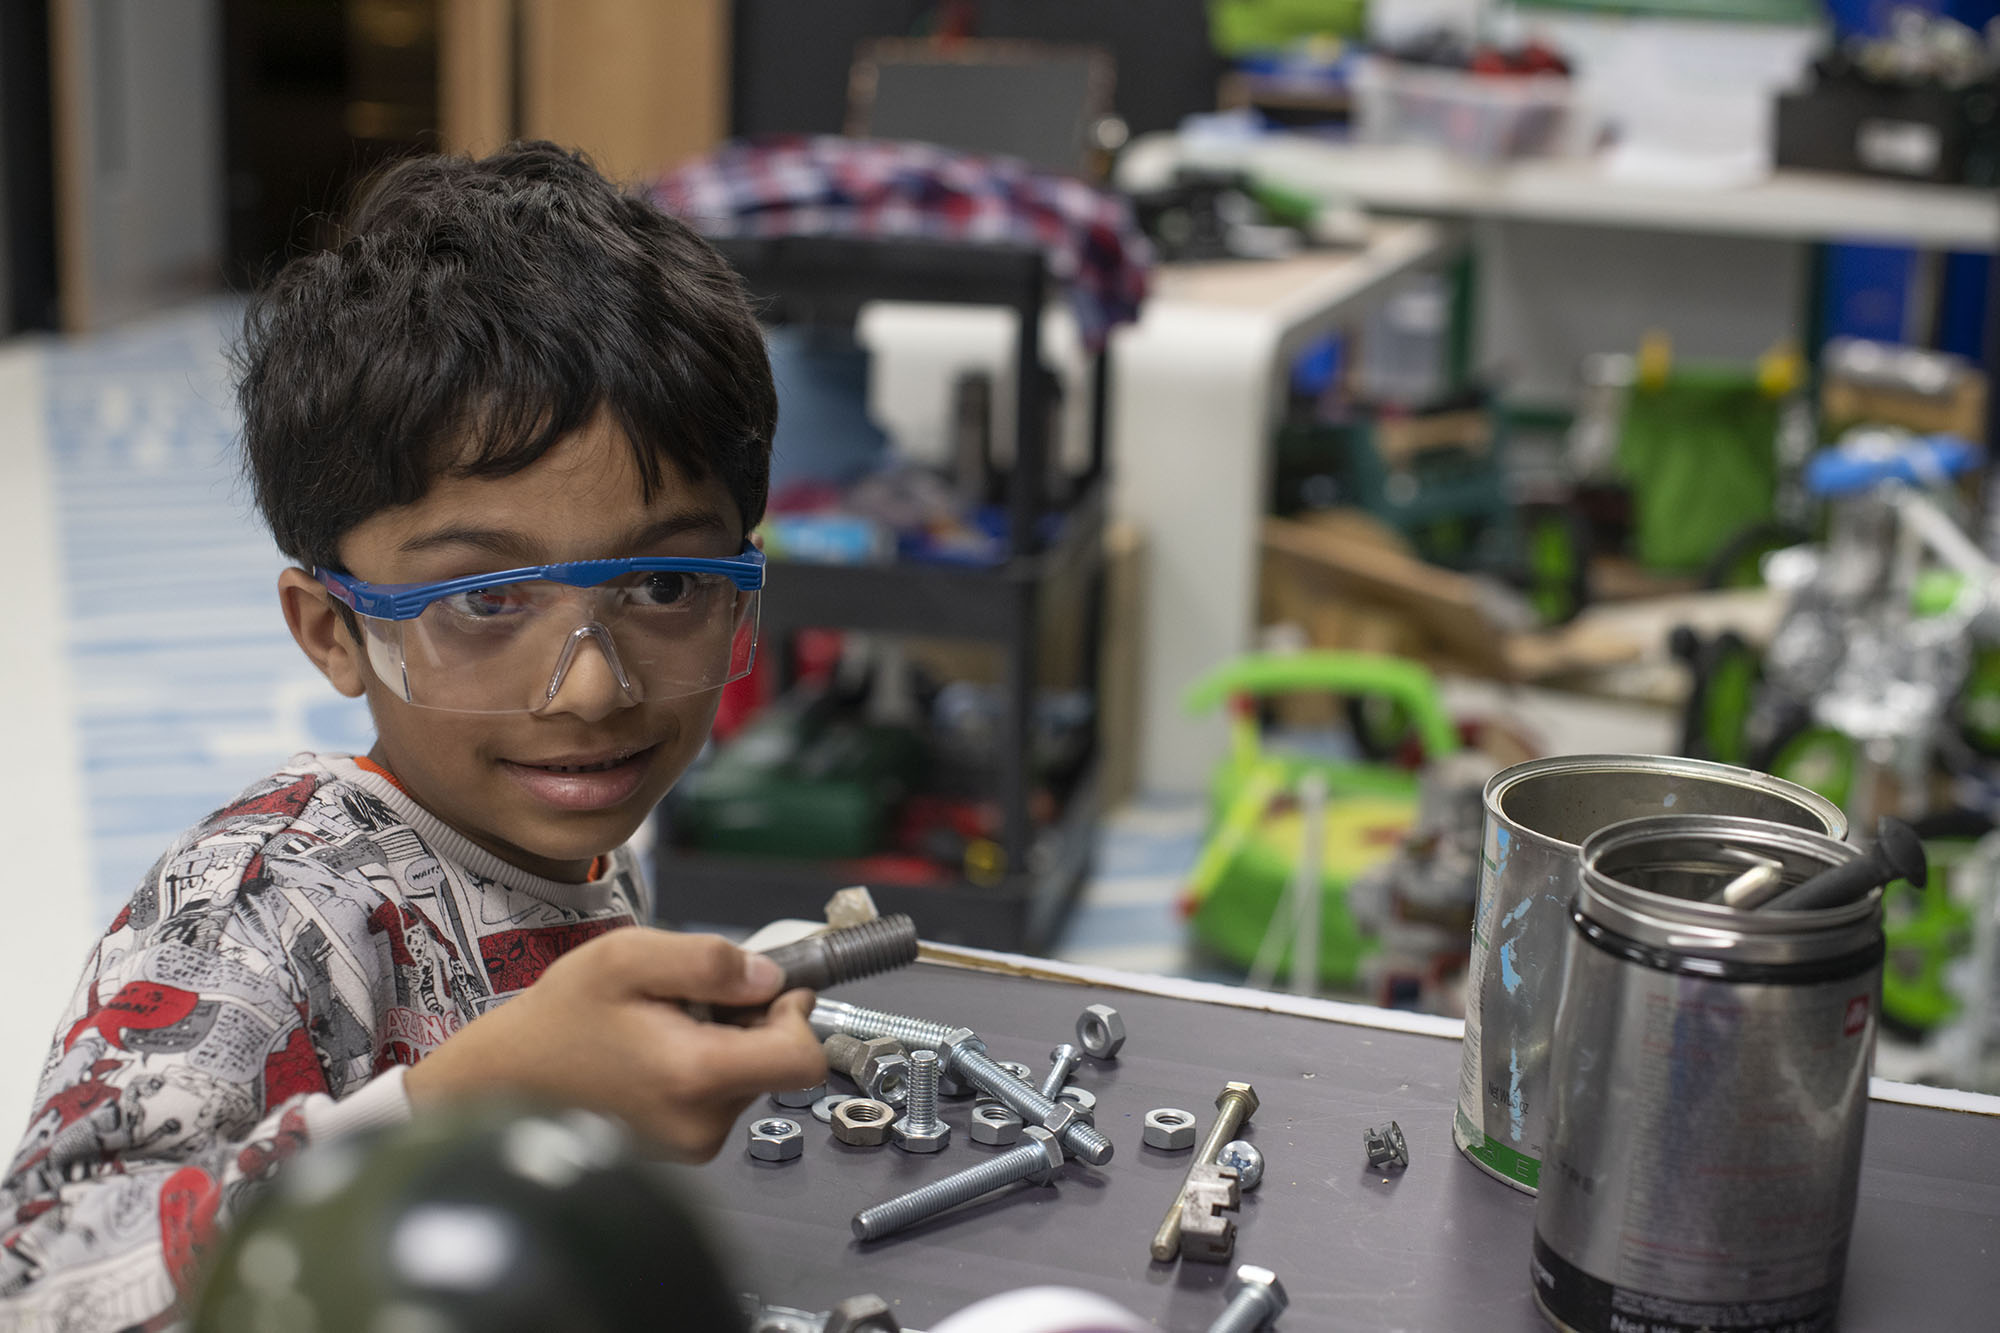 A boy wearing safety goggles is holding a metal bolt, picked up from a pile of nuts and bolts on the table in front of him.